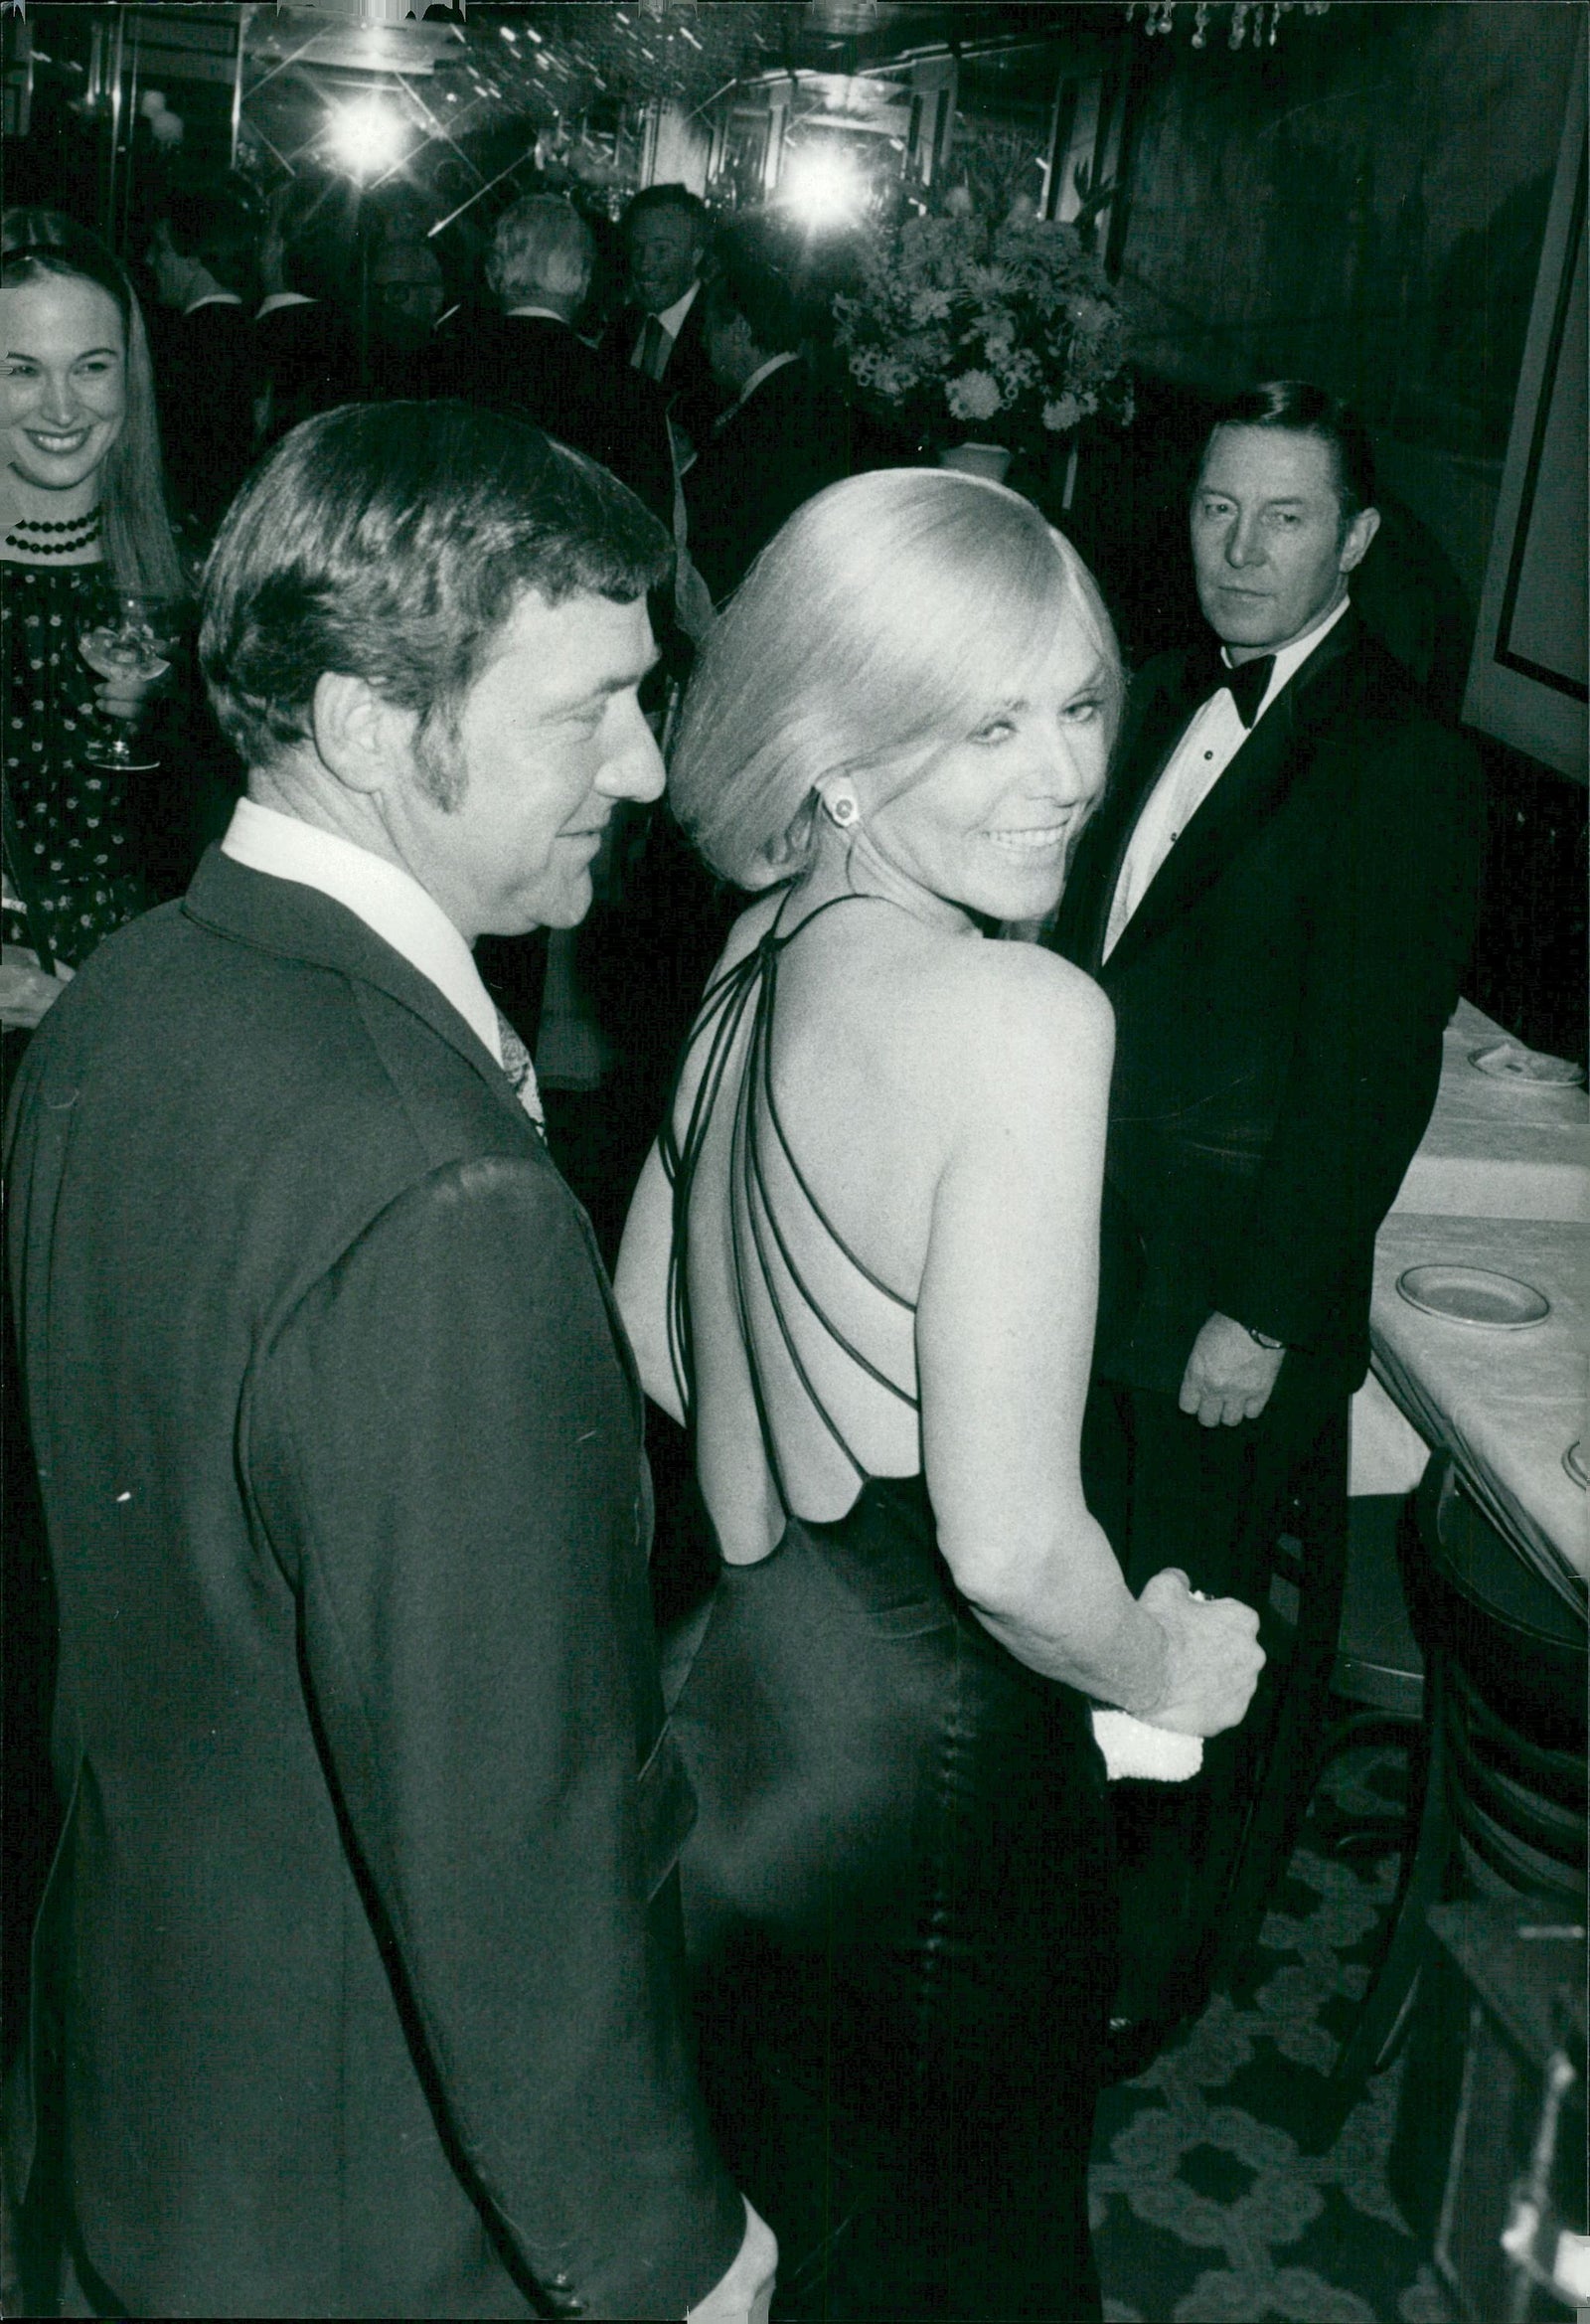 Actress Kim Novak with her husband Robert Malloy at the premiere of th